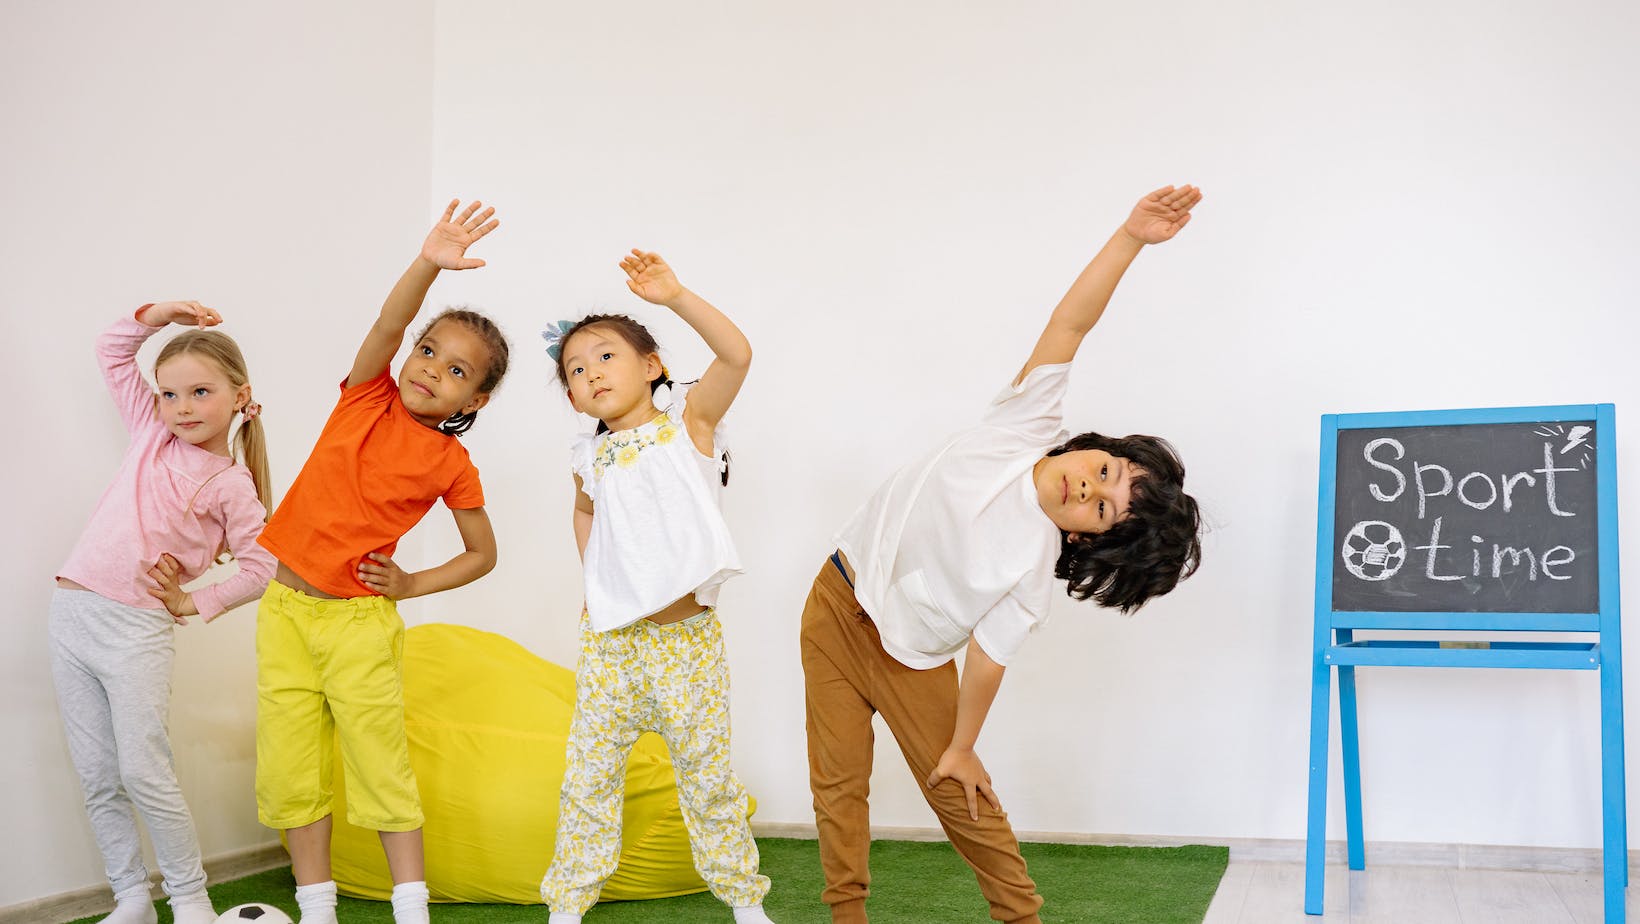 introducing young children to exercise can prevent __________.